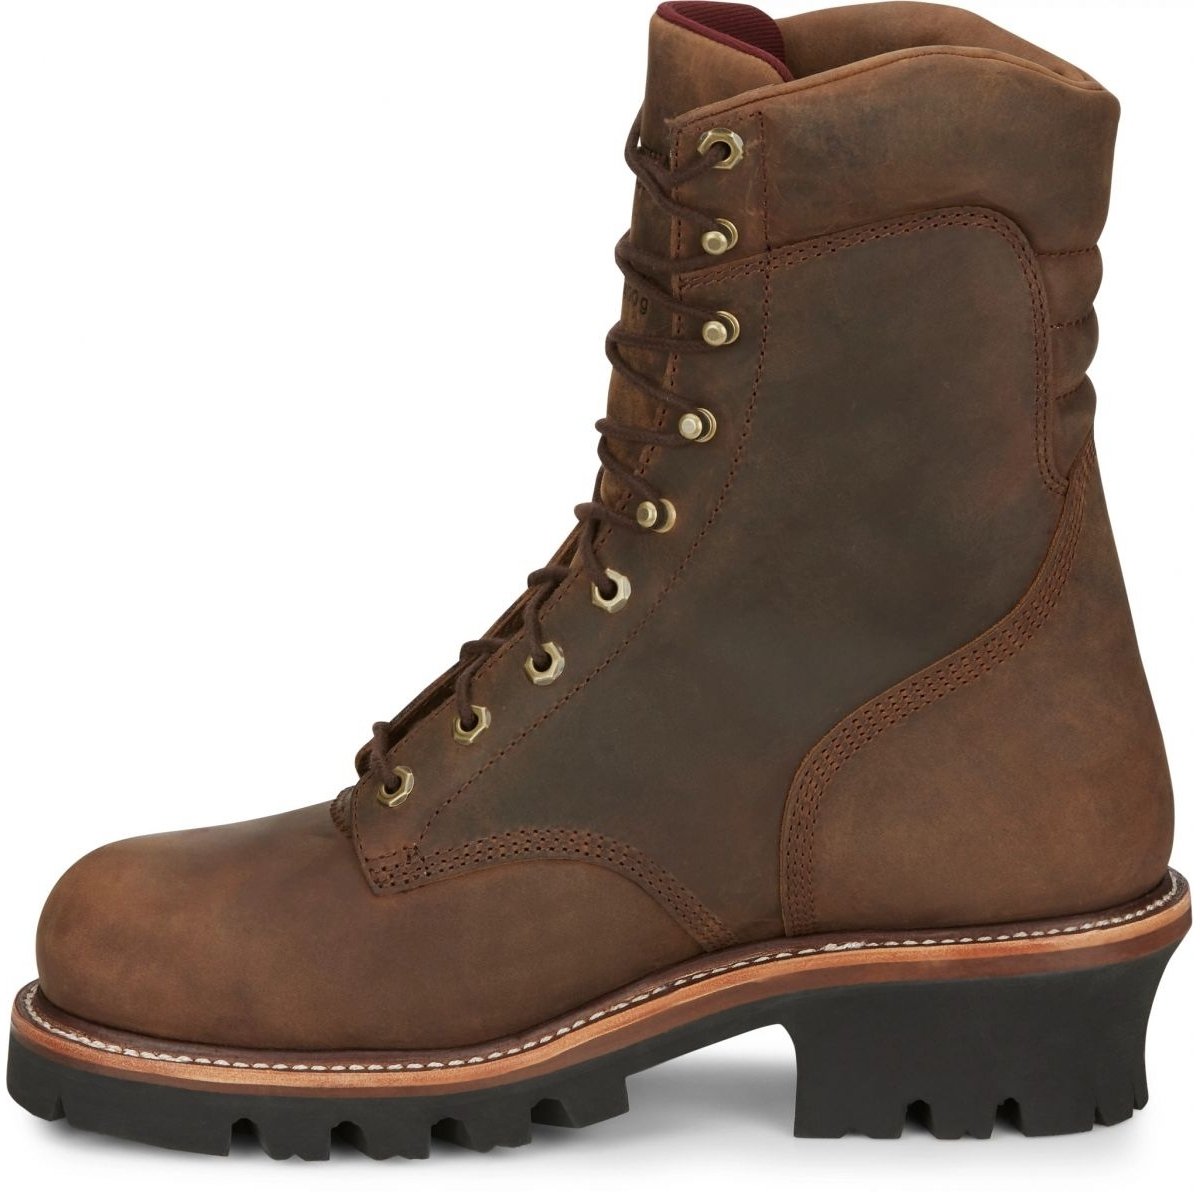 Chippewa Men's 9 Super DNA Steel Toe Waterproof Insulated Logger Work Boot Bay Apache - 59405 ONE SIZE BROWN - BROWN, 11 WIDE